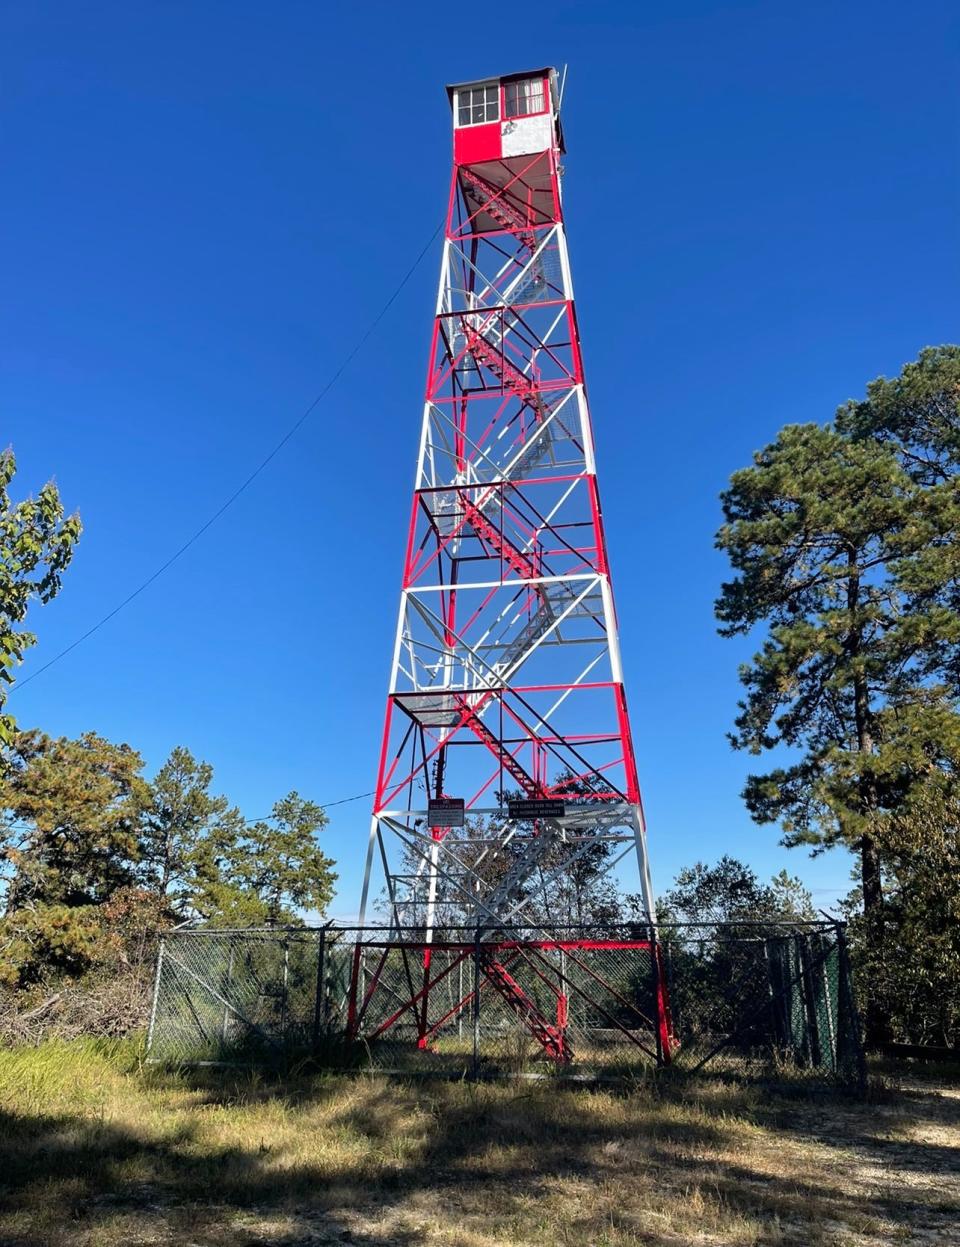 Fire lookout towers, like this one on Apple Pie Hill, are staffed with trained spotters on days when weather conditions are ripe for wildfire.